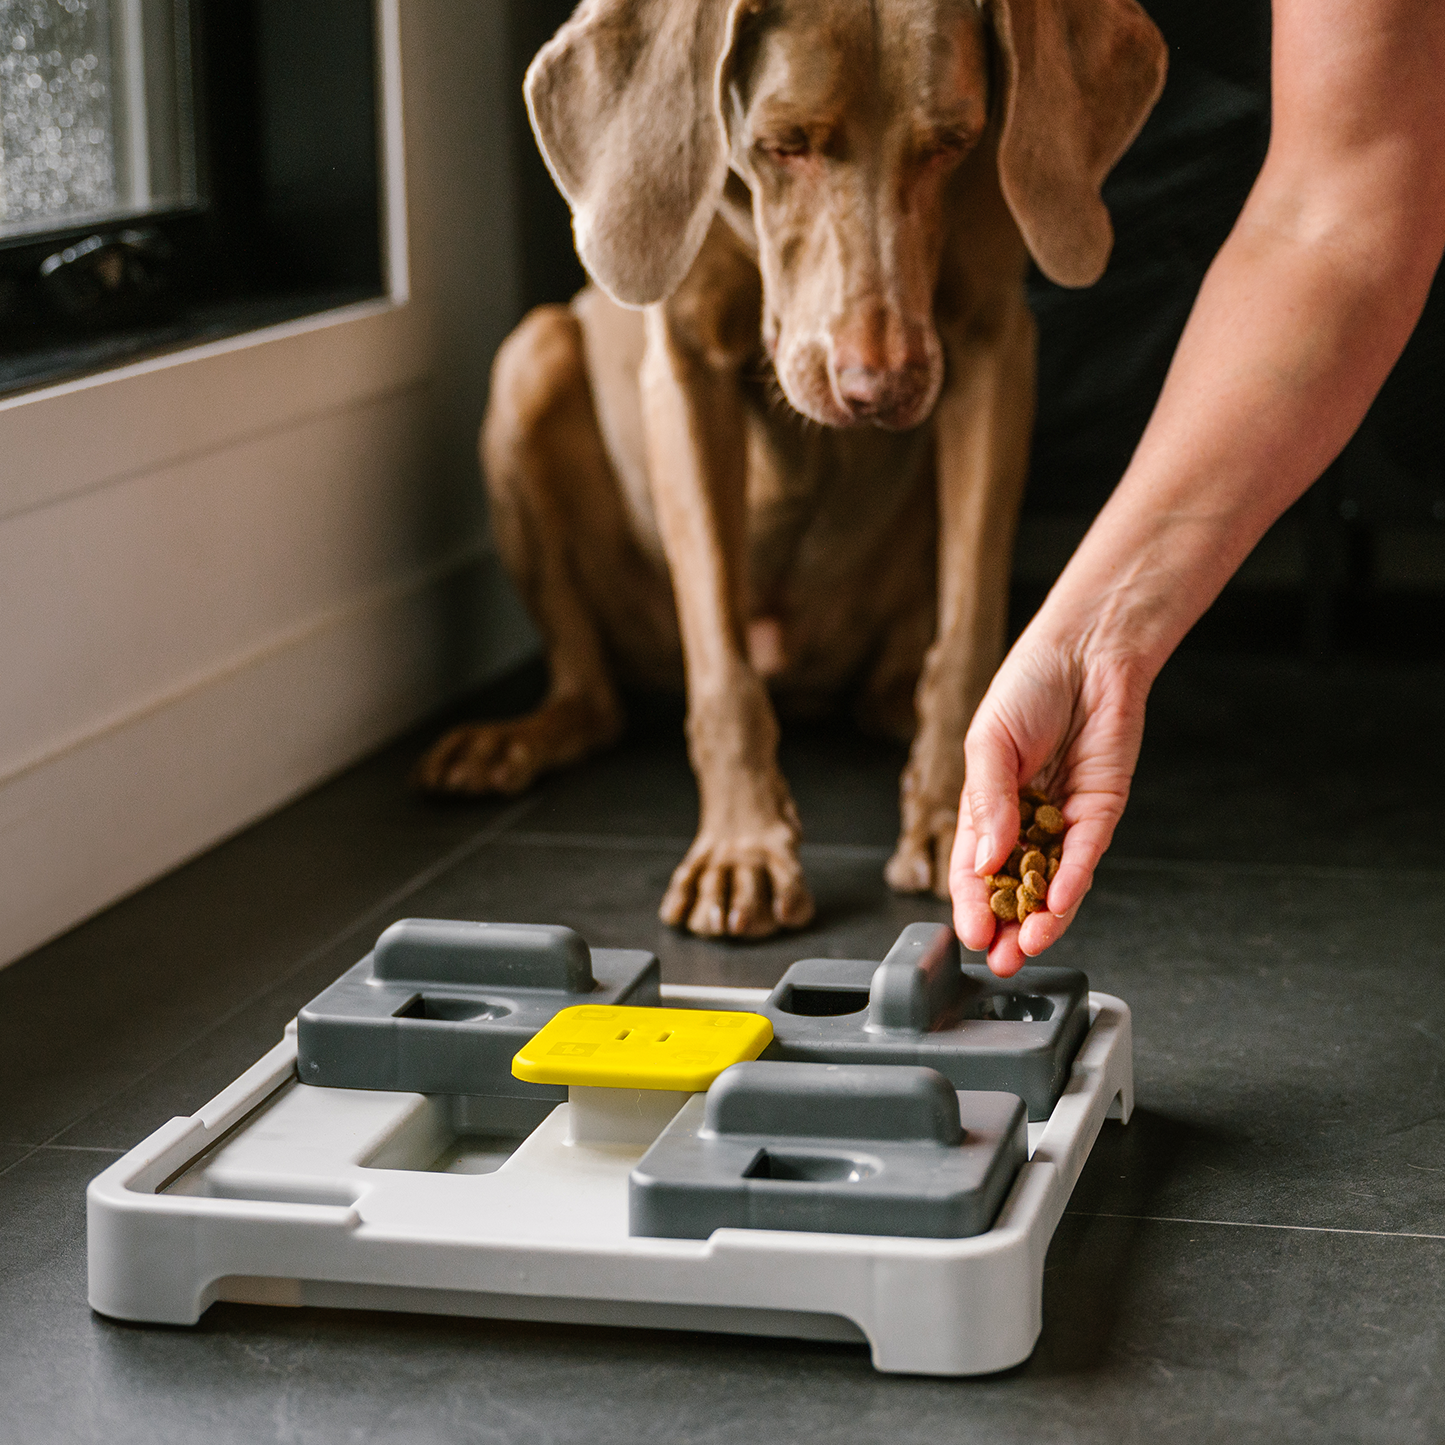 Push and find interactive dog Bowl